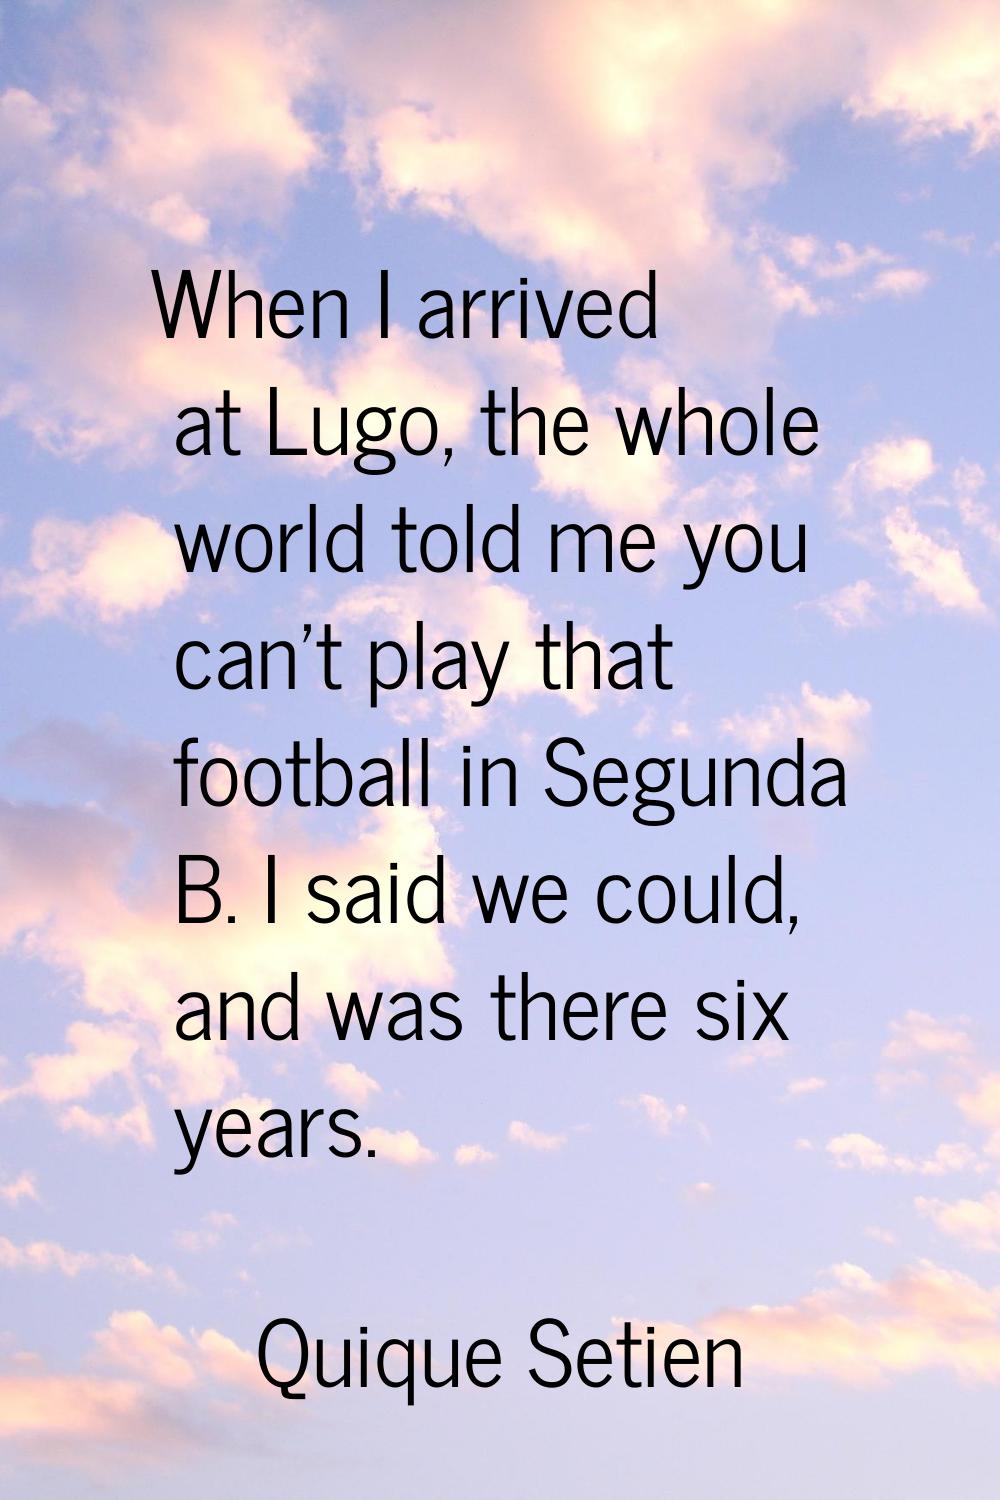 When I arrived at Lugo, the whole world told me you can't play that football in Segunda B. I said w